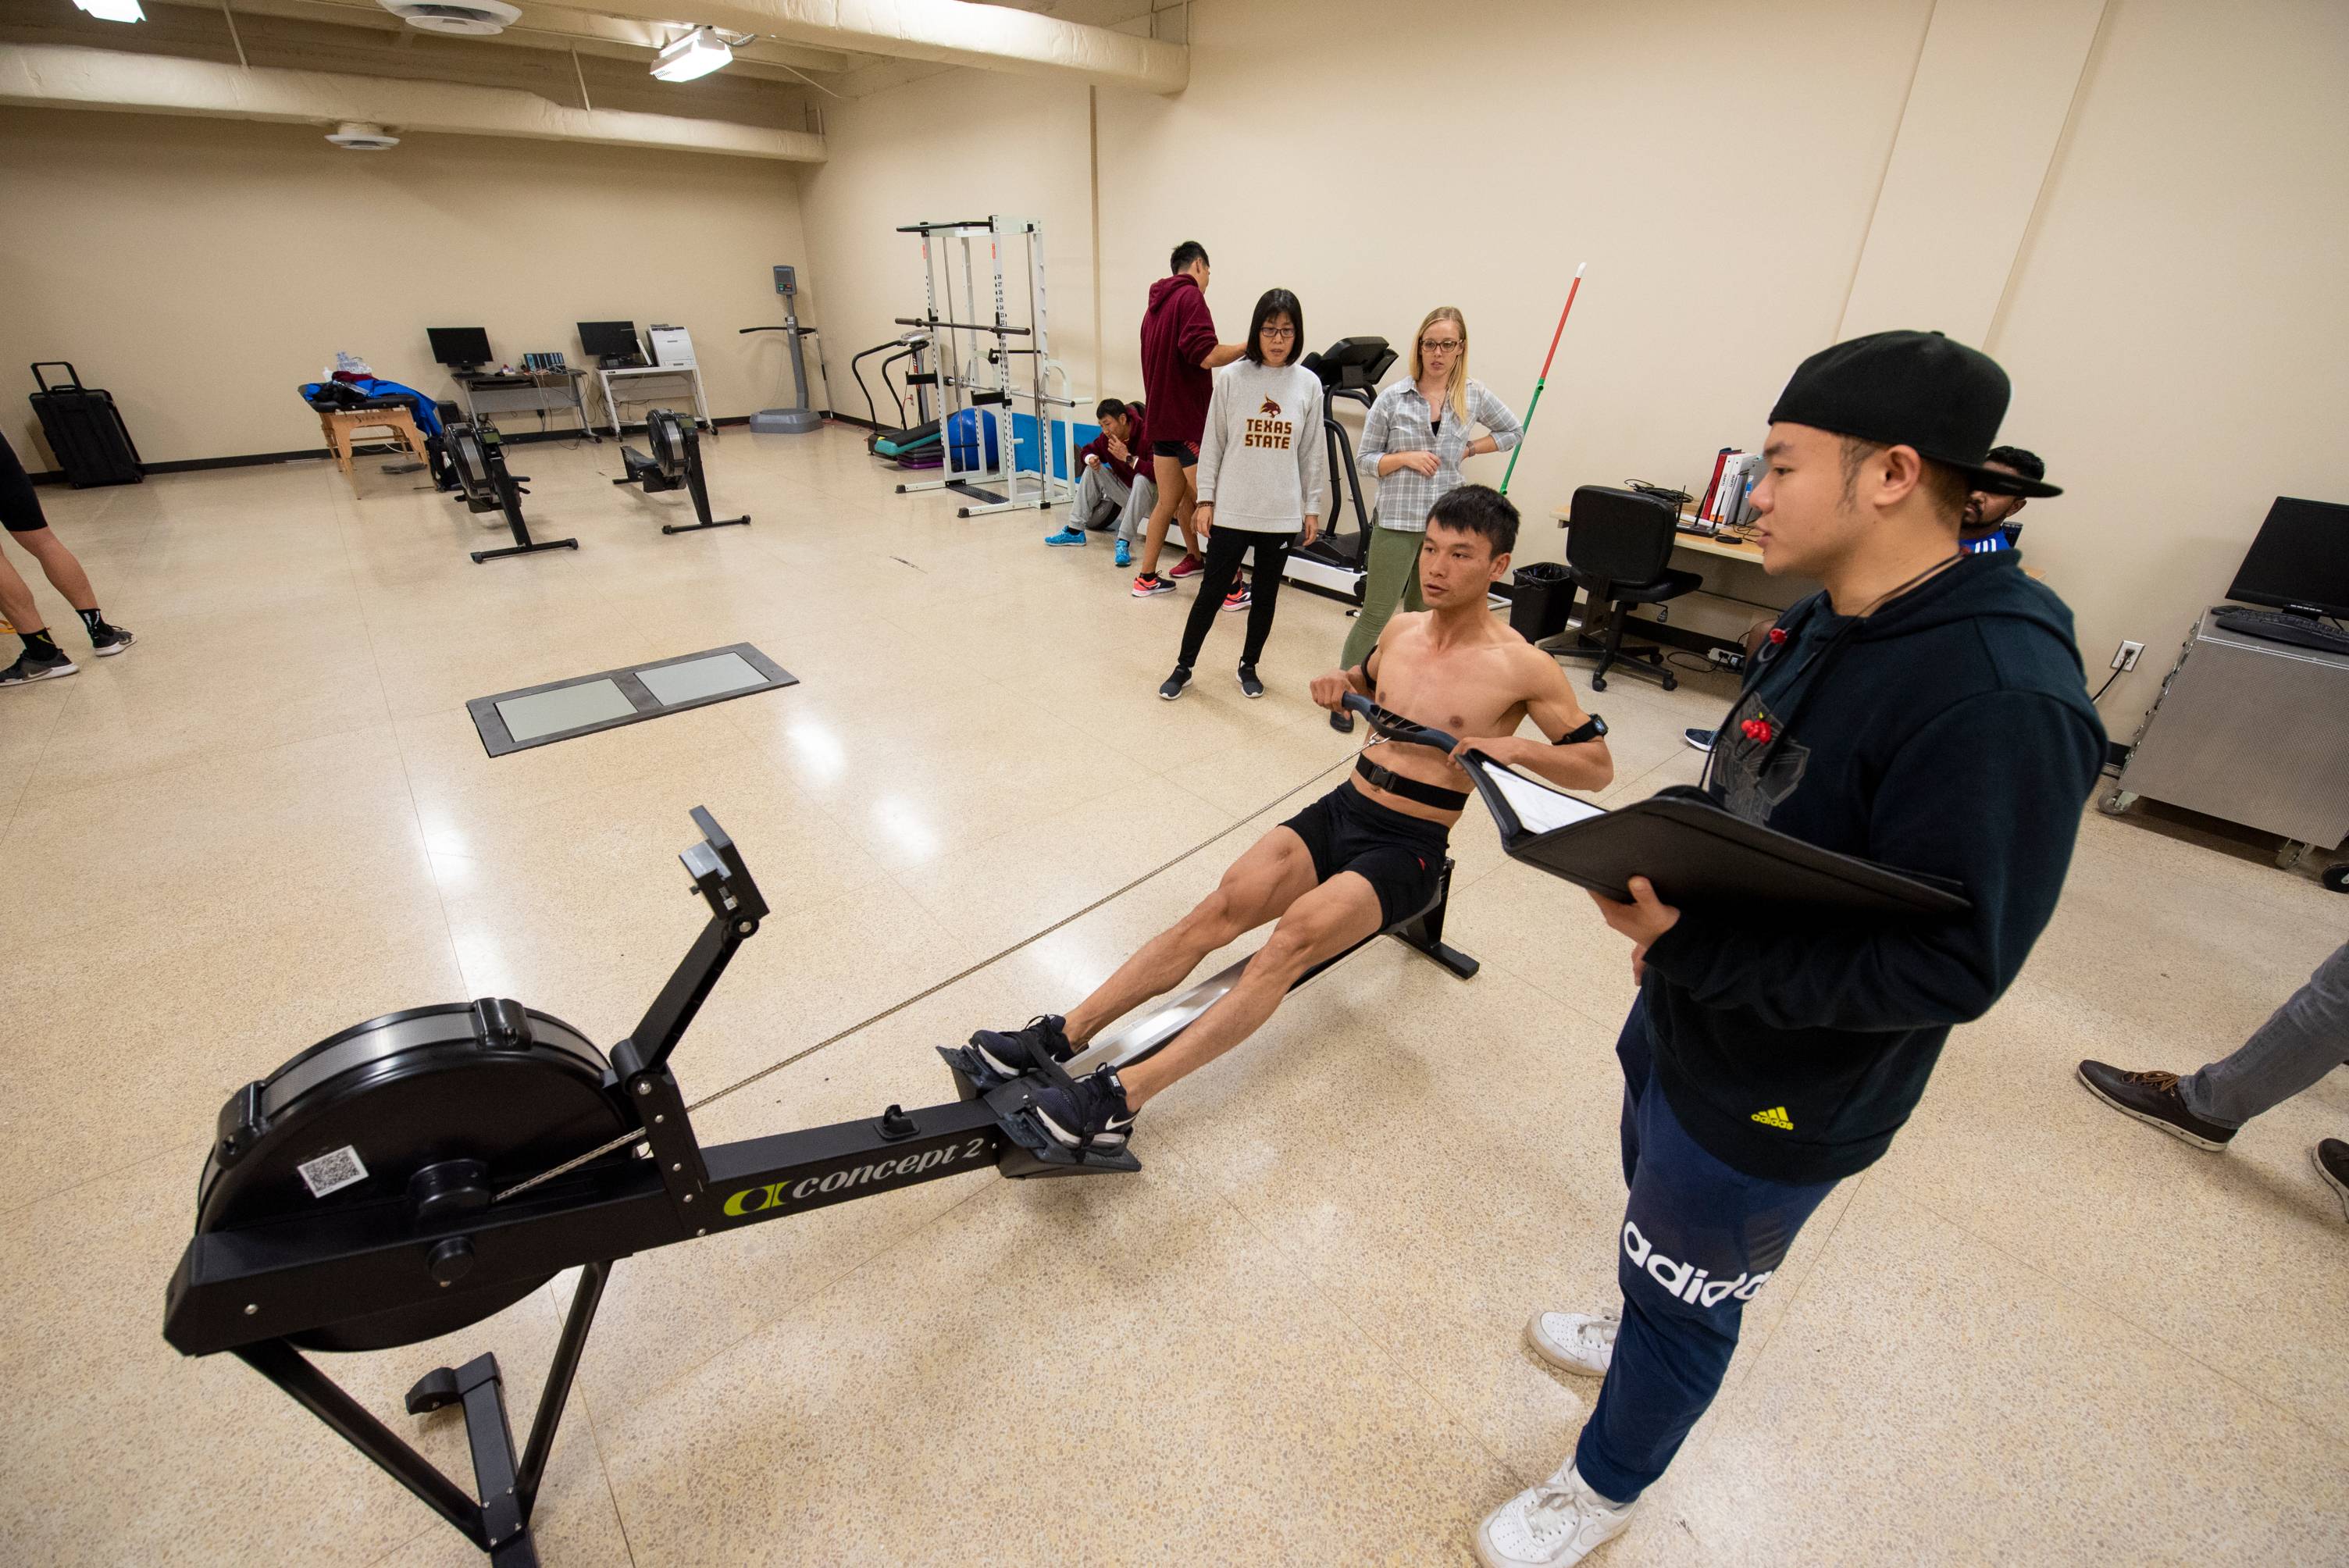 an member of the team uses a rowing machine while a graduate student records notes. Texas State faculty look on in the background.